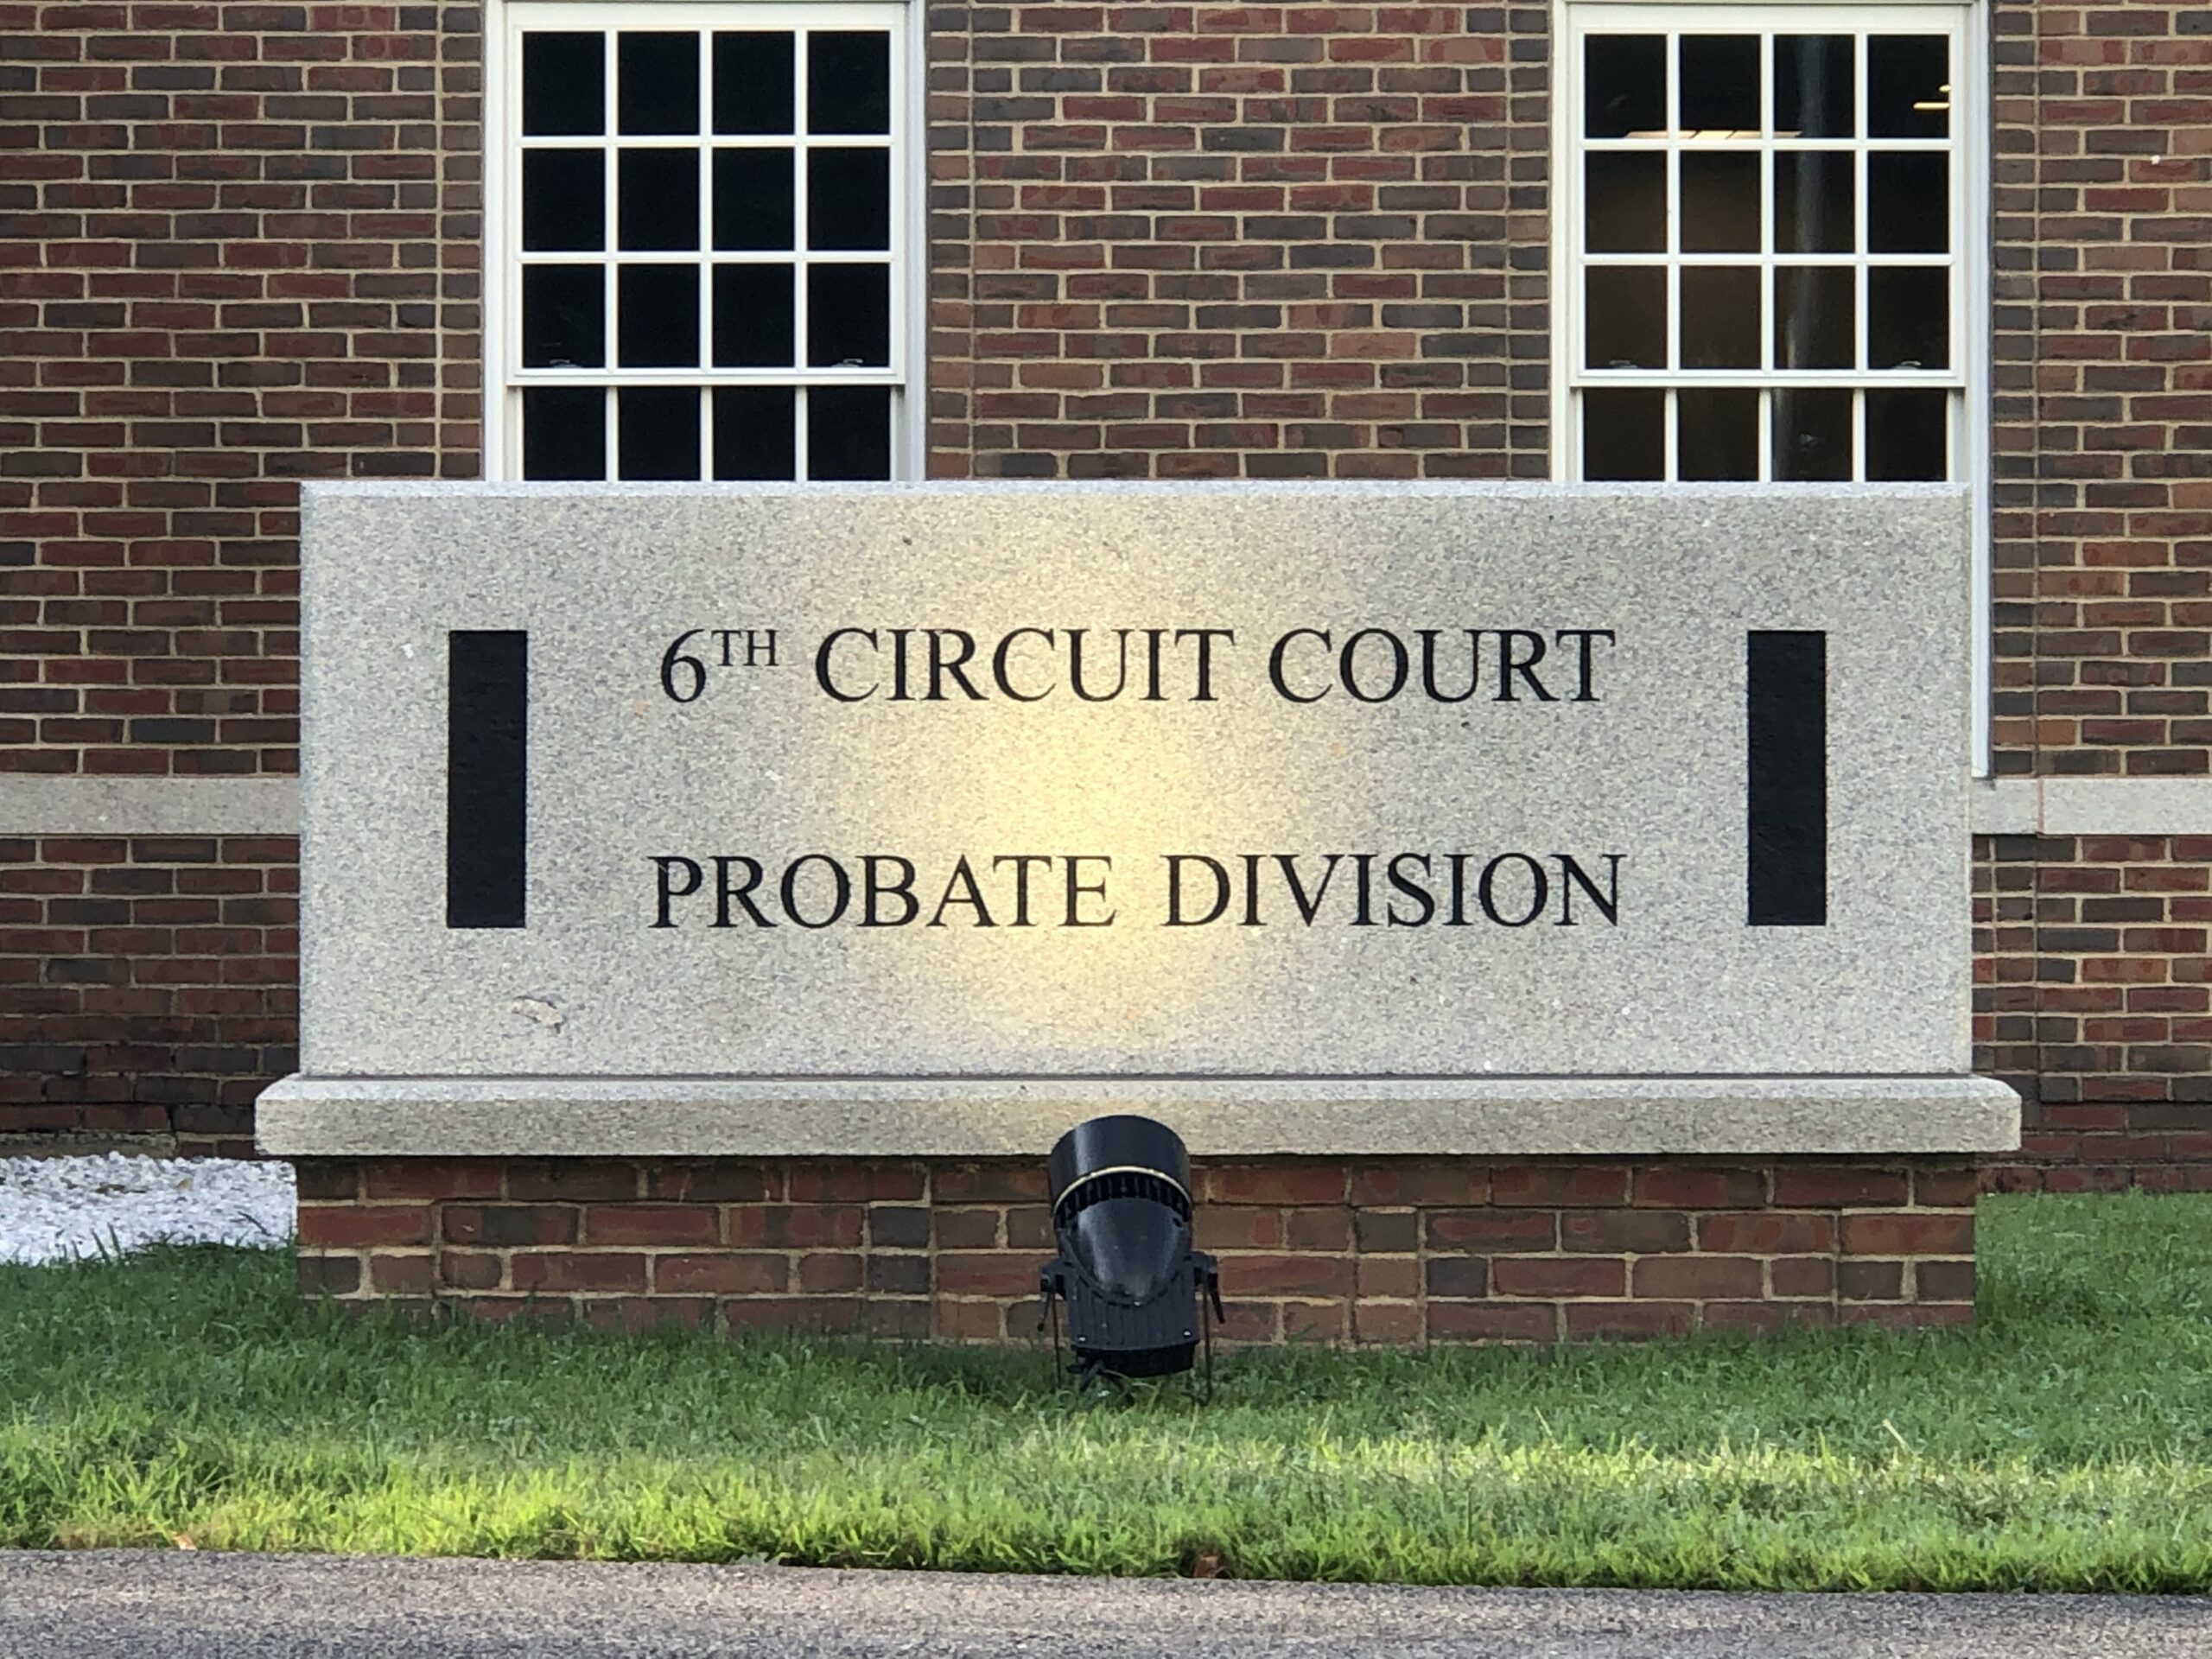 Concord NH Probate Court (6th Circuit Court Probate Division, Monument Sign)